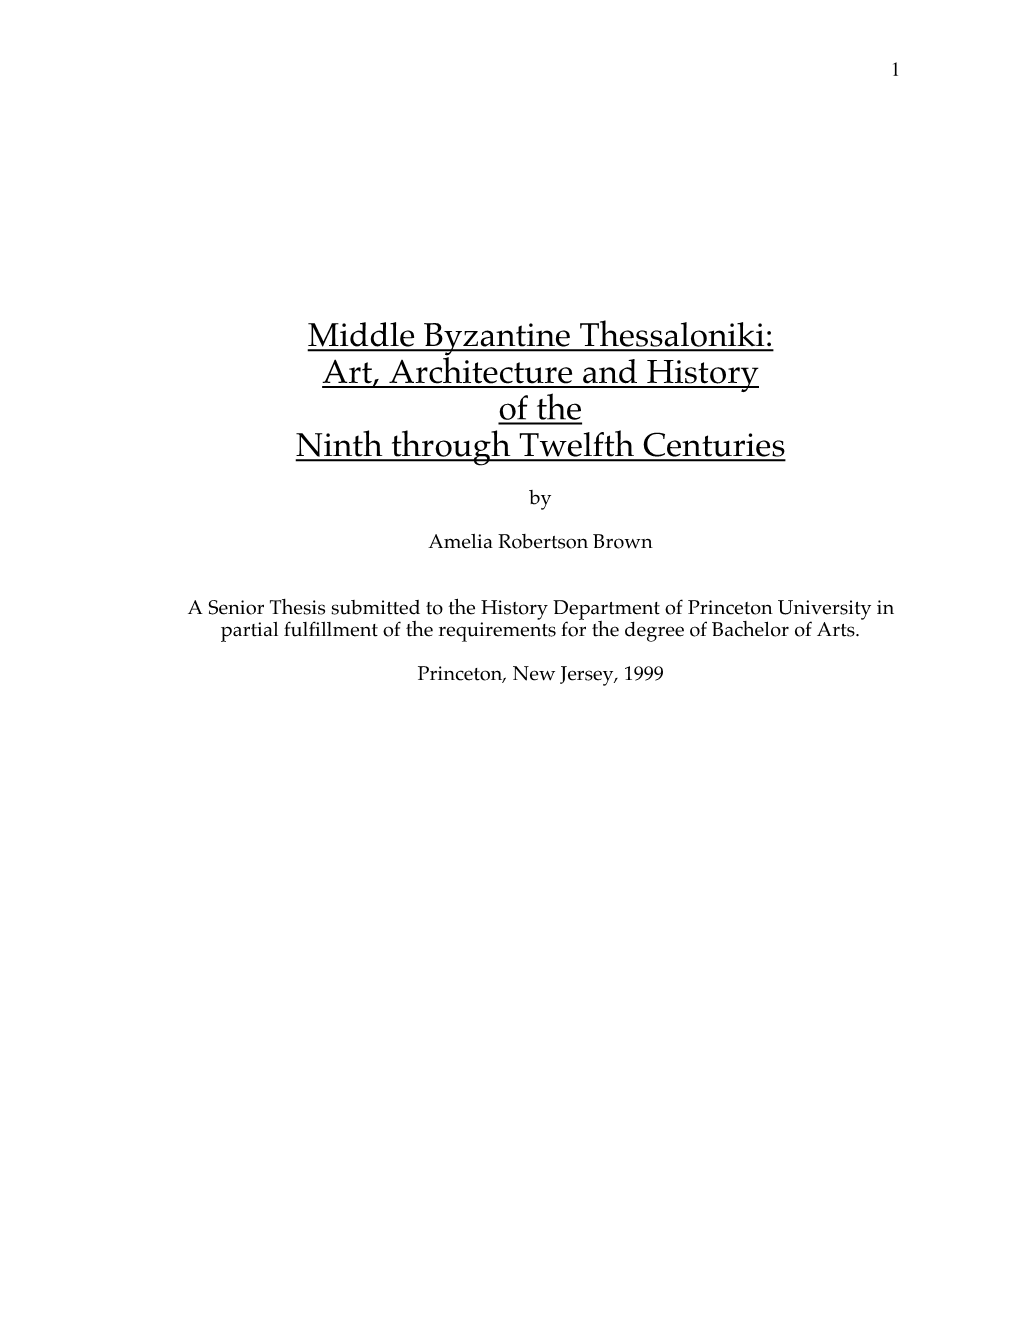 Middle Byzantine Thessaloniki: Art, Architecture and History of the Ninth Through Twelfth Centuries